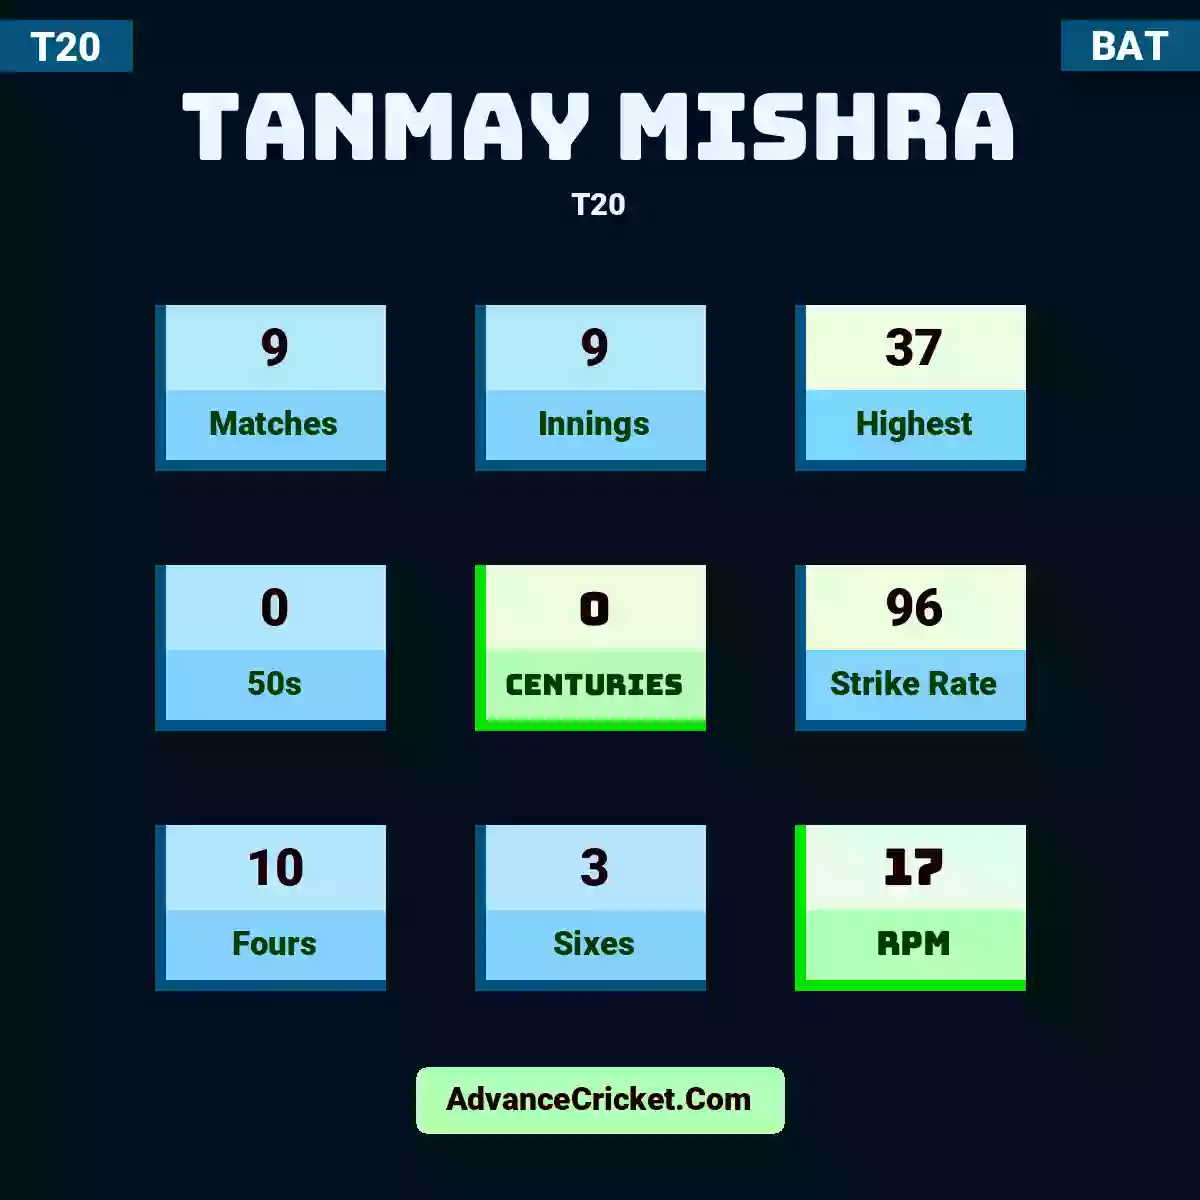 Tanmay Mishra T20 , Tanmay Mishra played 9 matches, scored 37 runs as highest, 0 half-centuries, and 0 centuries, with a strike rate of 96. T.Mishra hit 10 fours and 3 sixes, with an RPM of 17.